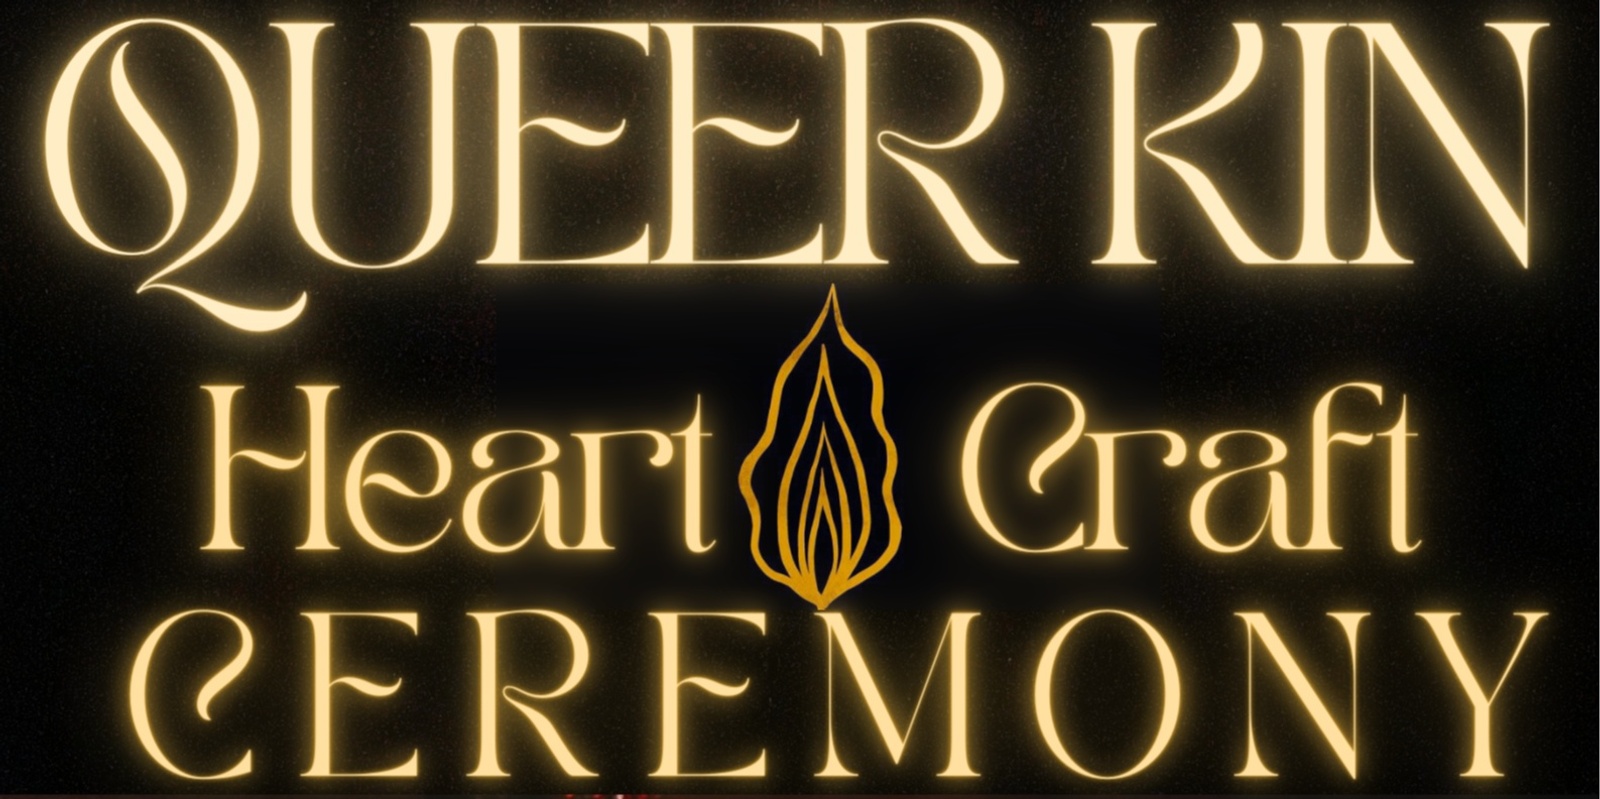 Banner image for QUEER KIN HEART CRAFT CEREMONY 